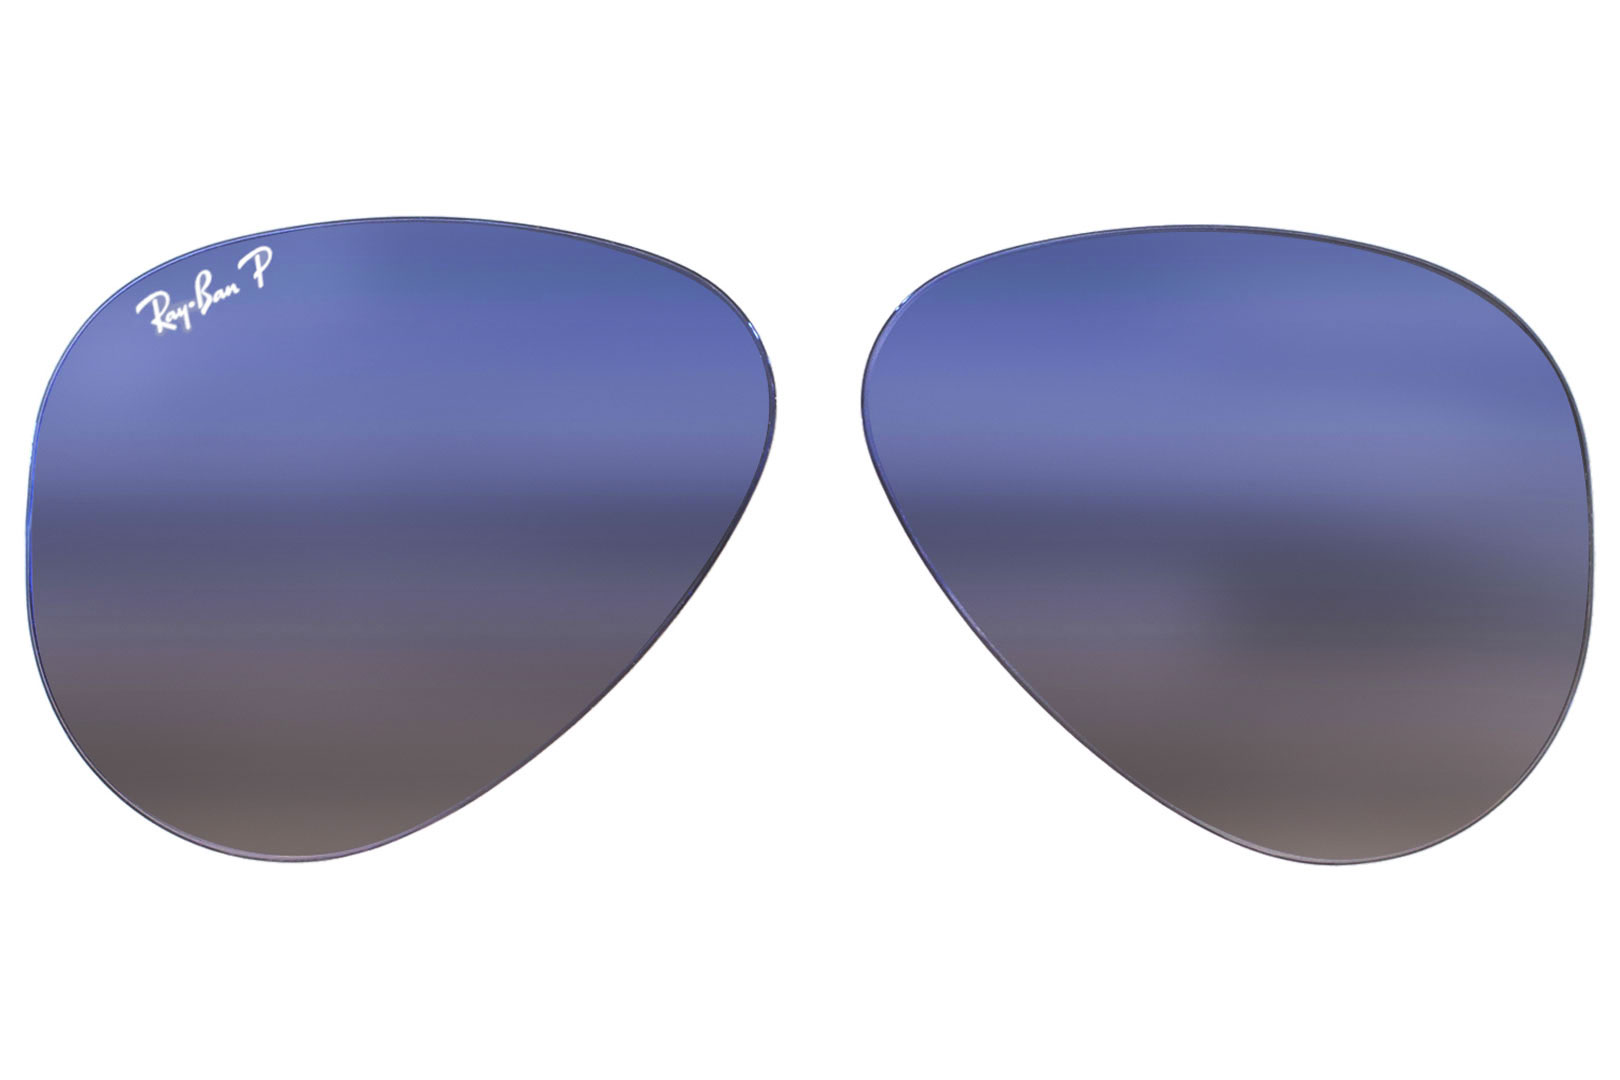 Ray Ban RB3025 & RB3026 Sunglasses Replacement Lens Blue Polarized